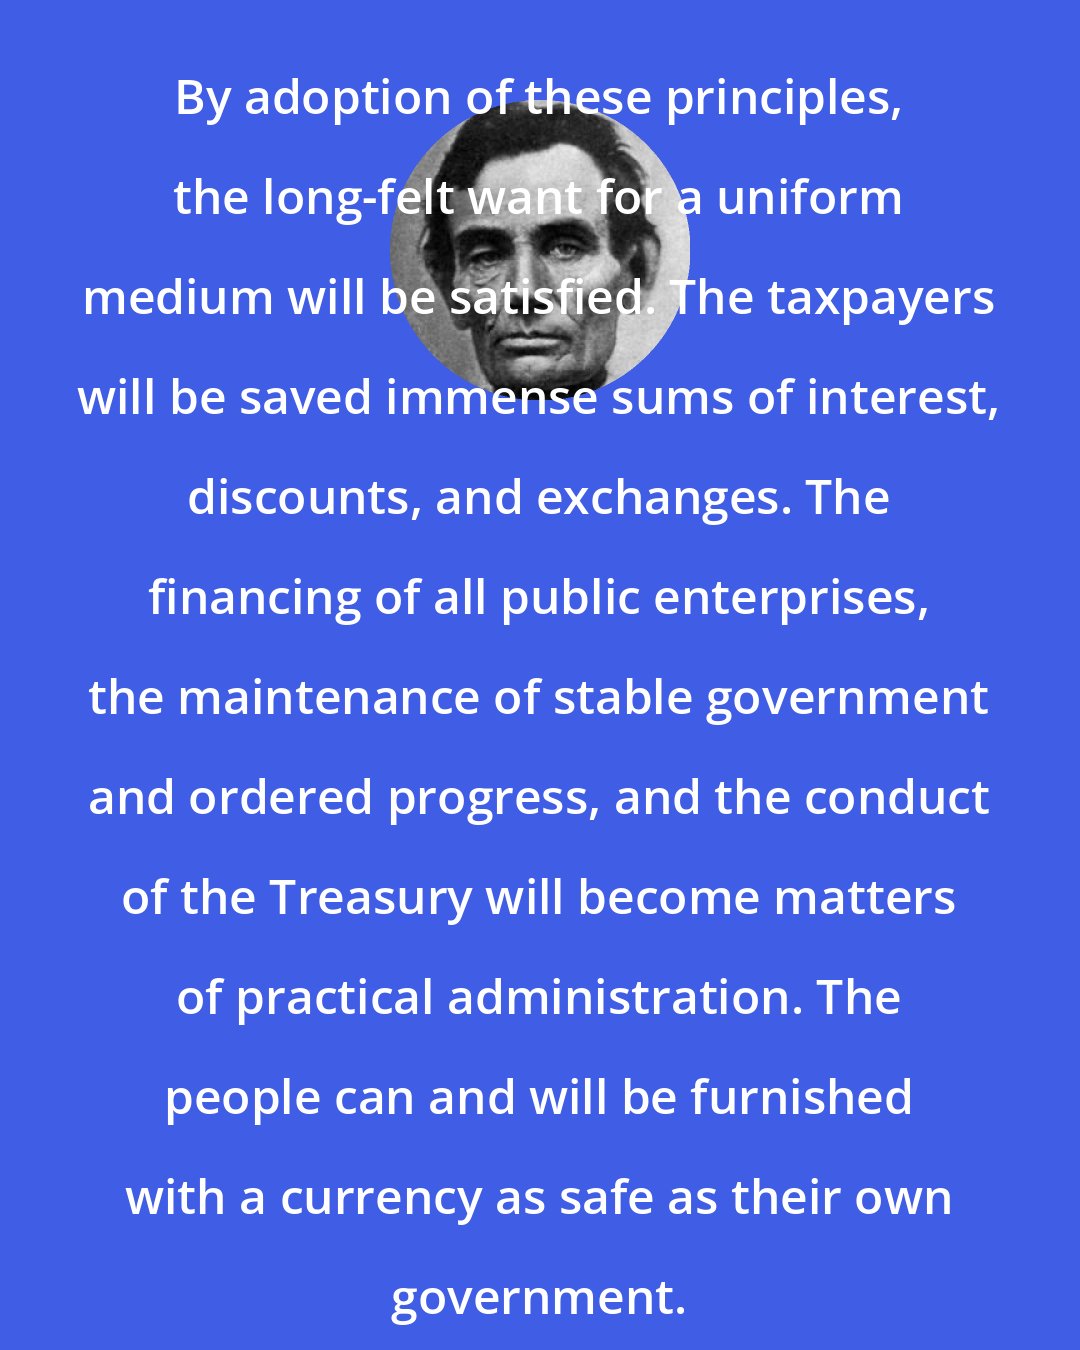 Abraham Lincoln: By adoption of these principles, the long-felt want for a uniform medium will be satisfied. The taxpayers will be saved immense sums of interest, discounts, and exchanges. The financing of all public enterprises, the maintenance of stable government and ordered progress, and the conduct of the Treasury will become matters of practical administration. The people can and will be furnished with a currency as safe as their own government.